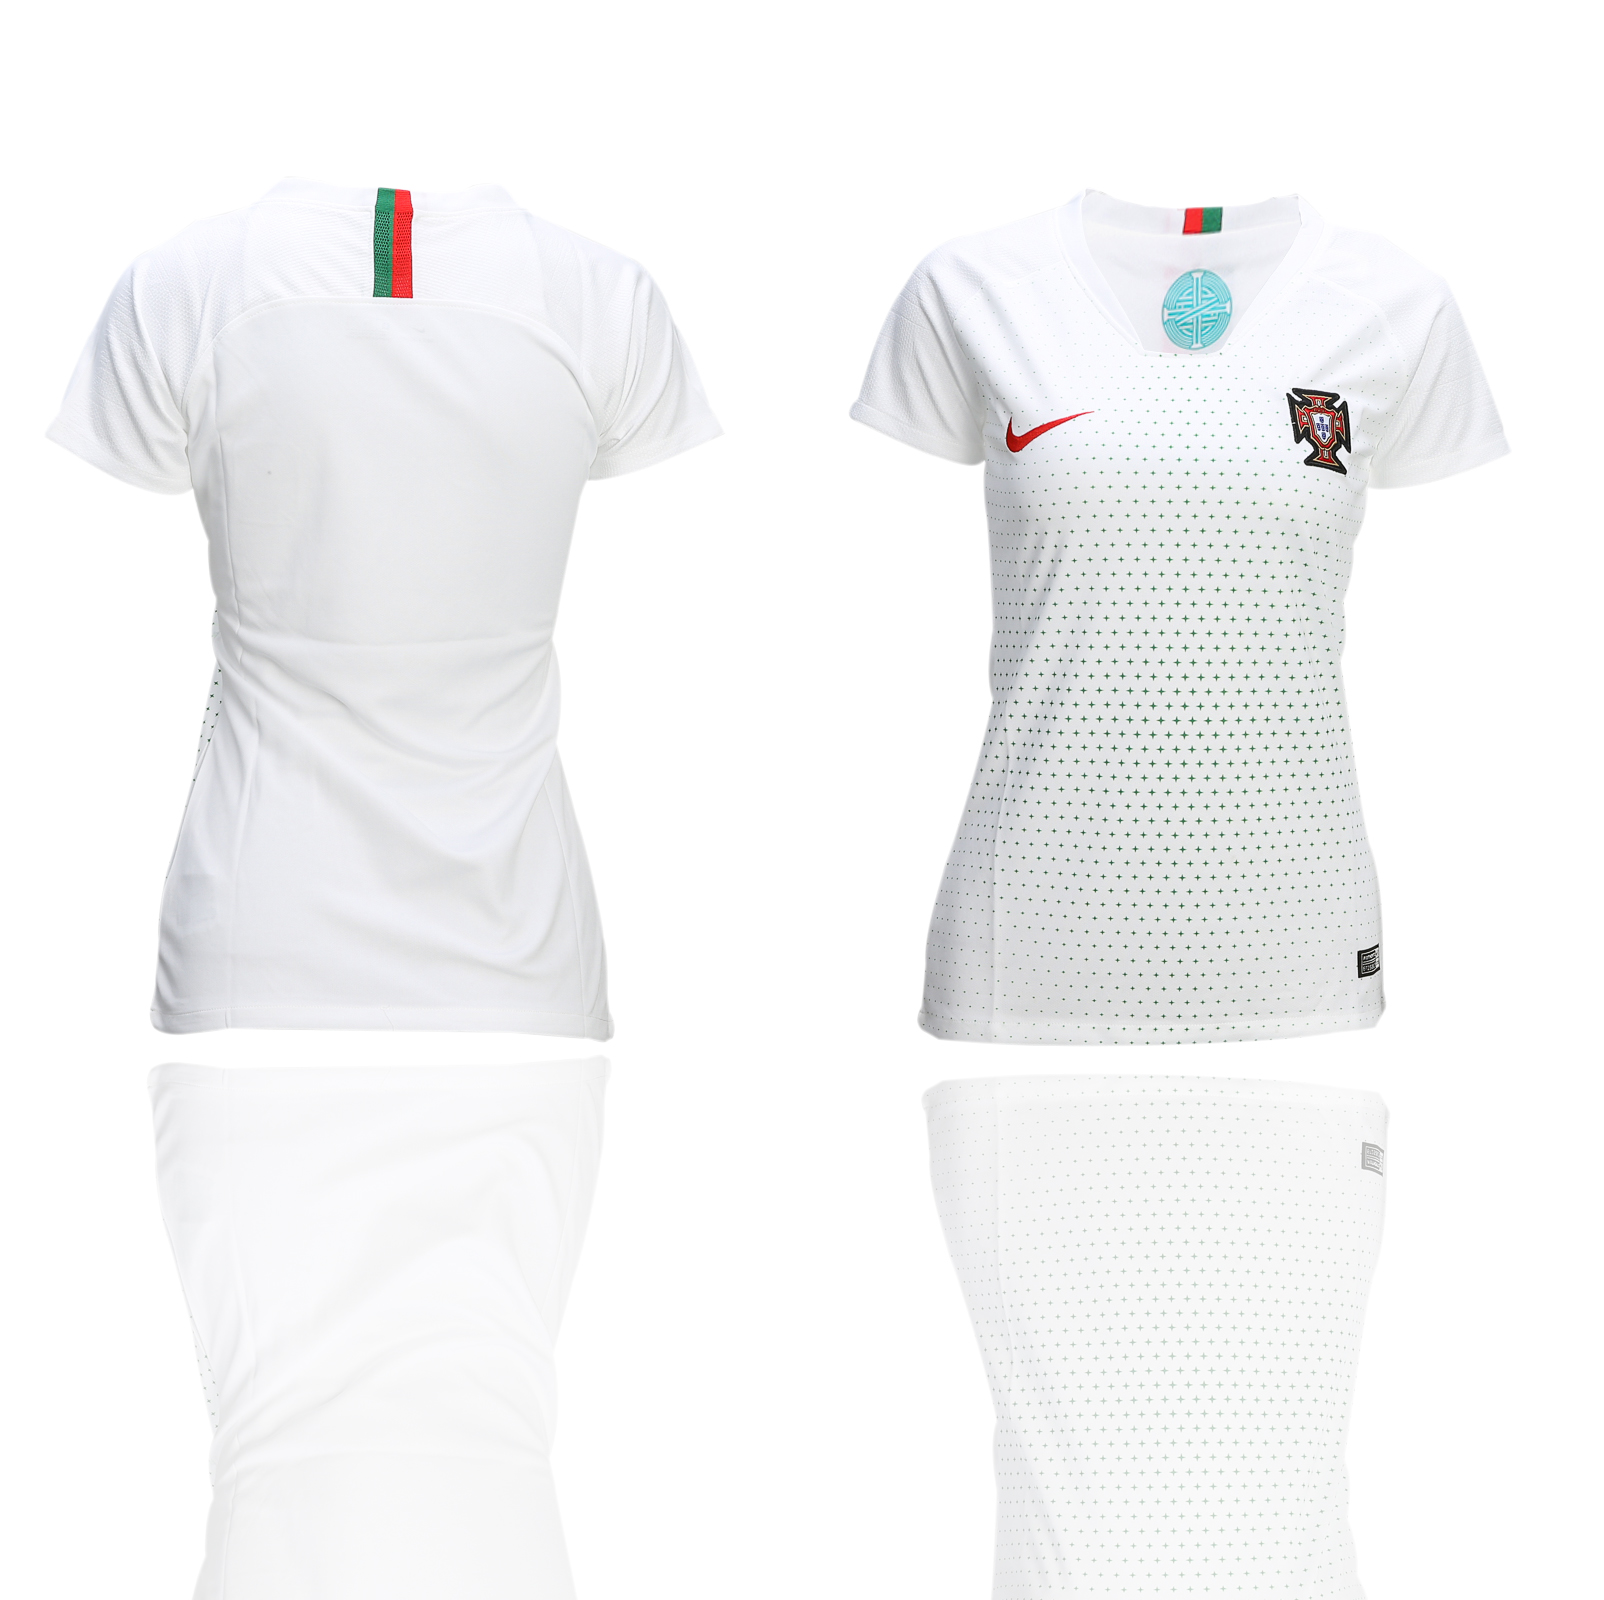 Portugal Away Woman 2018 FIFA World Cup Soccer Jersey